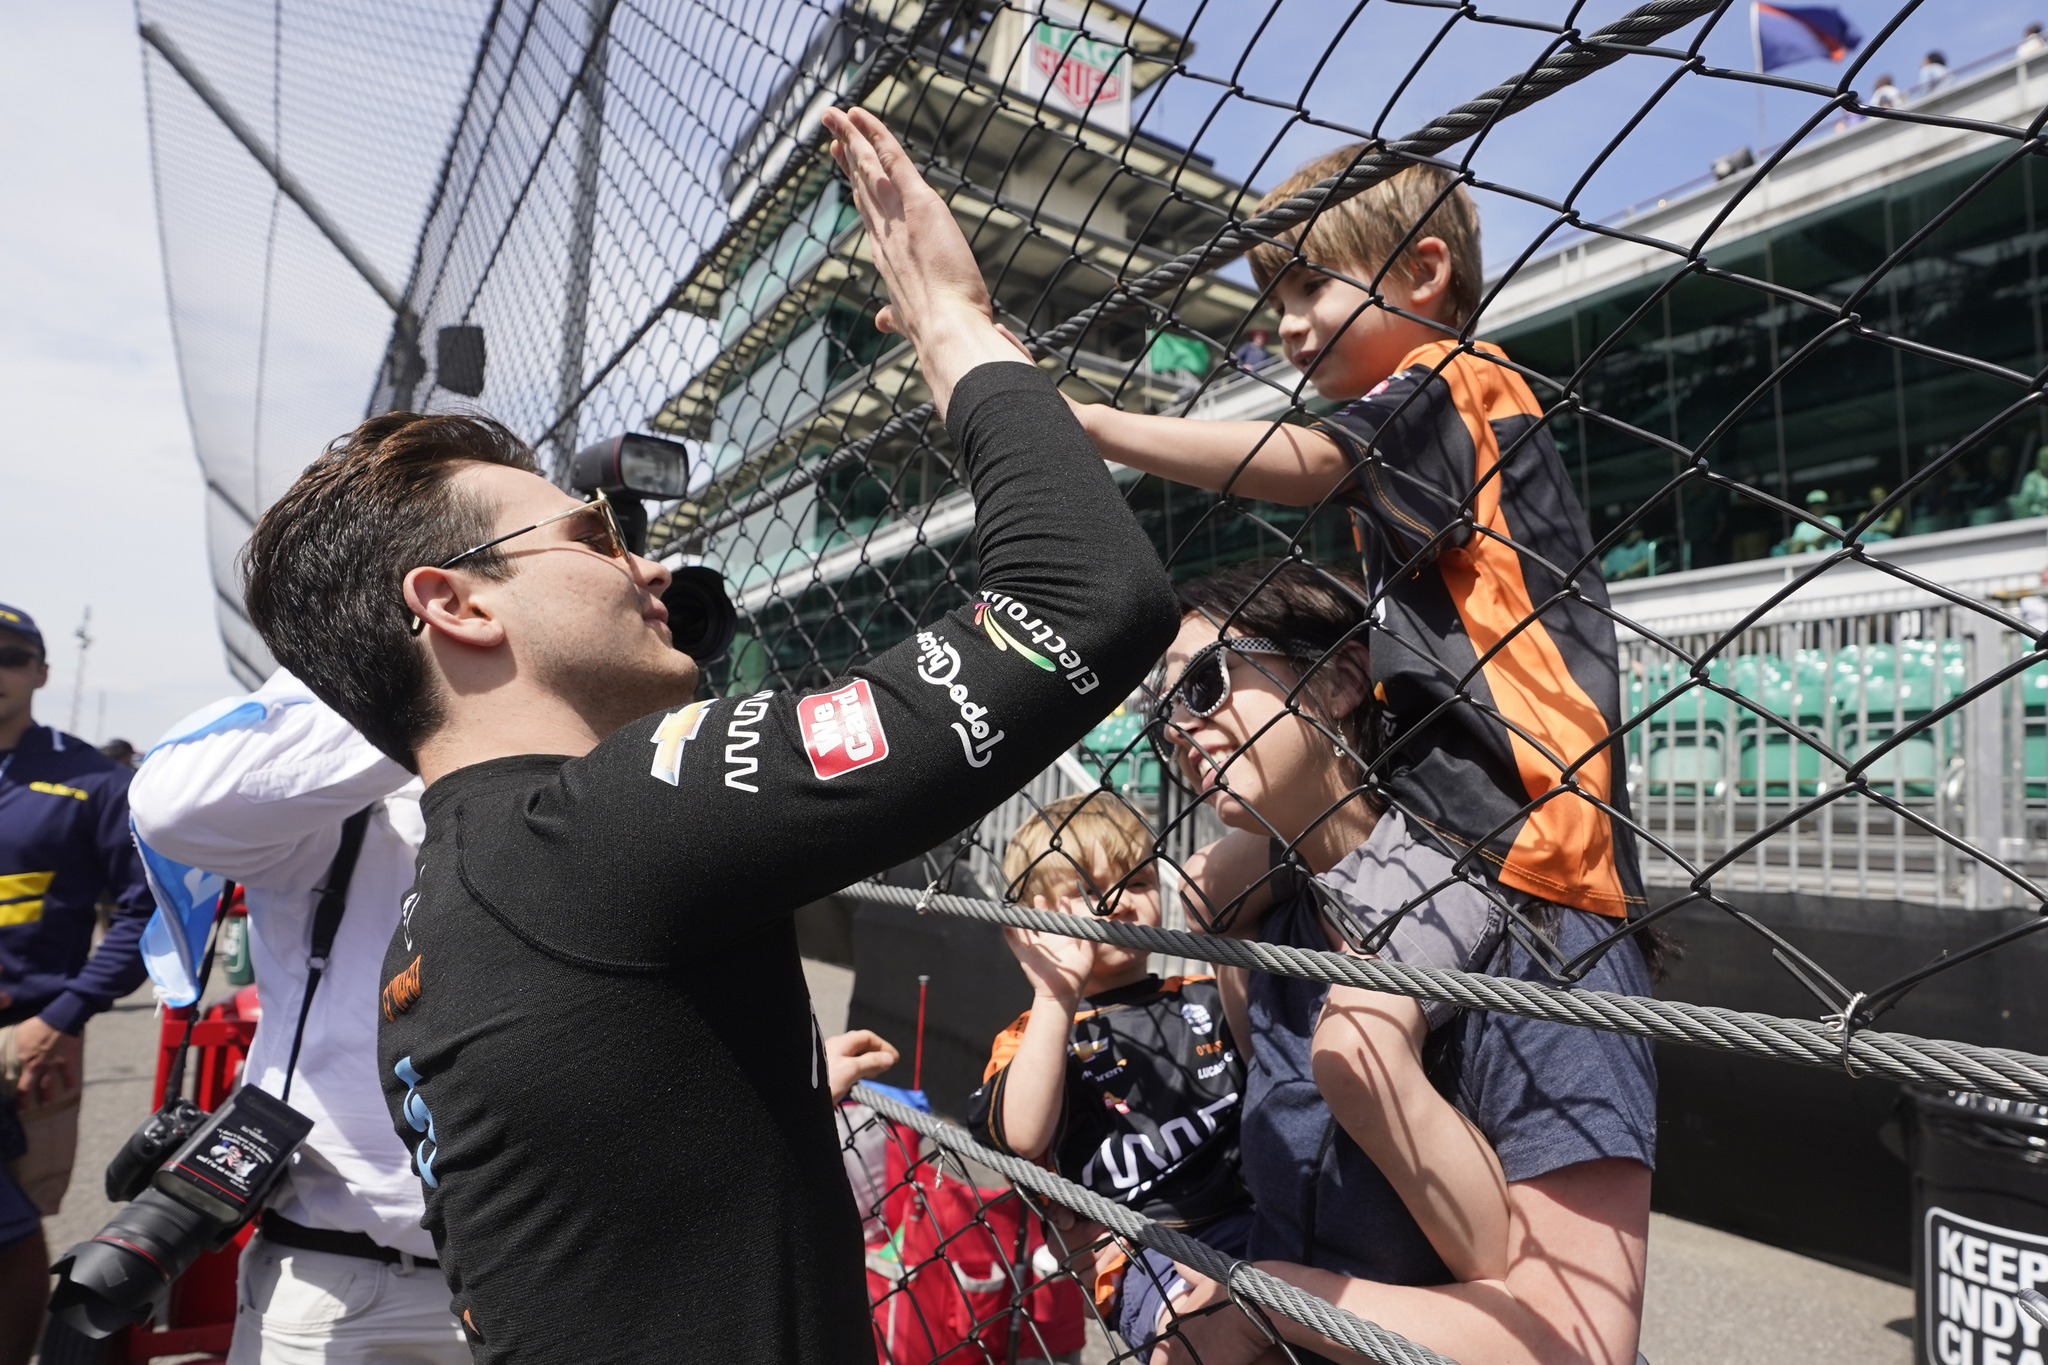 Pato O'Ward, left, of Mexico, gets a high-five from a fan before qualifications for the Indianapolis 500.